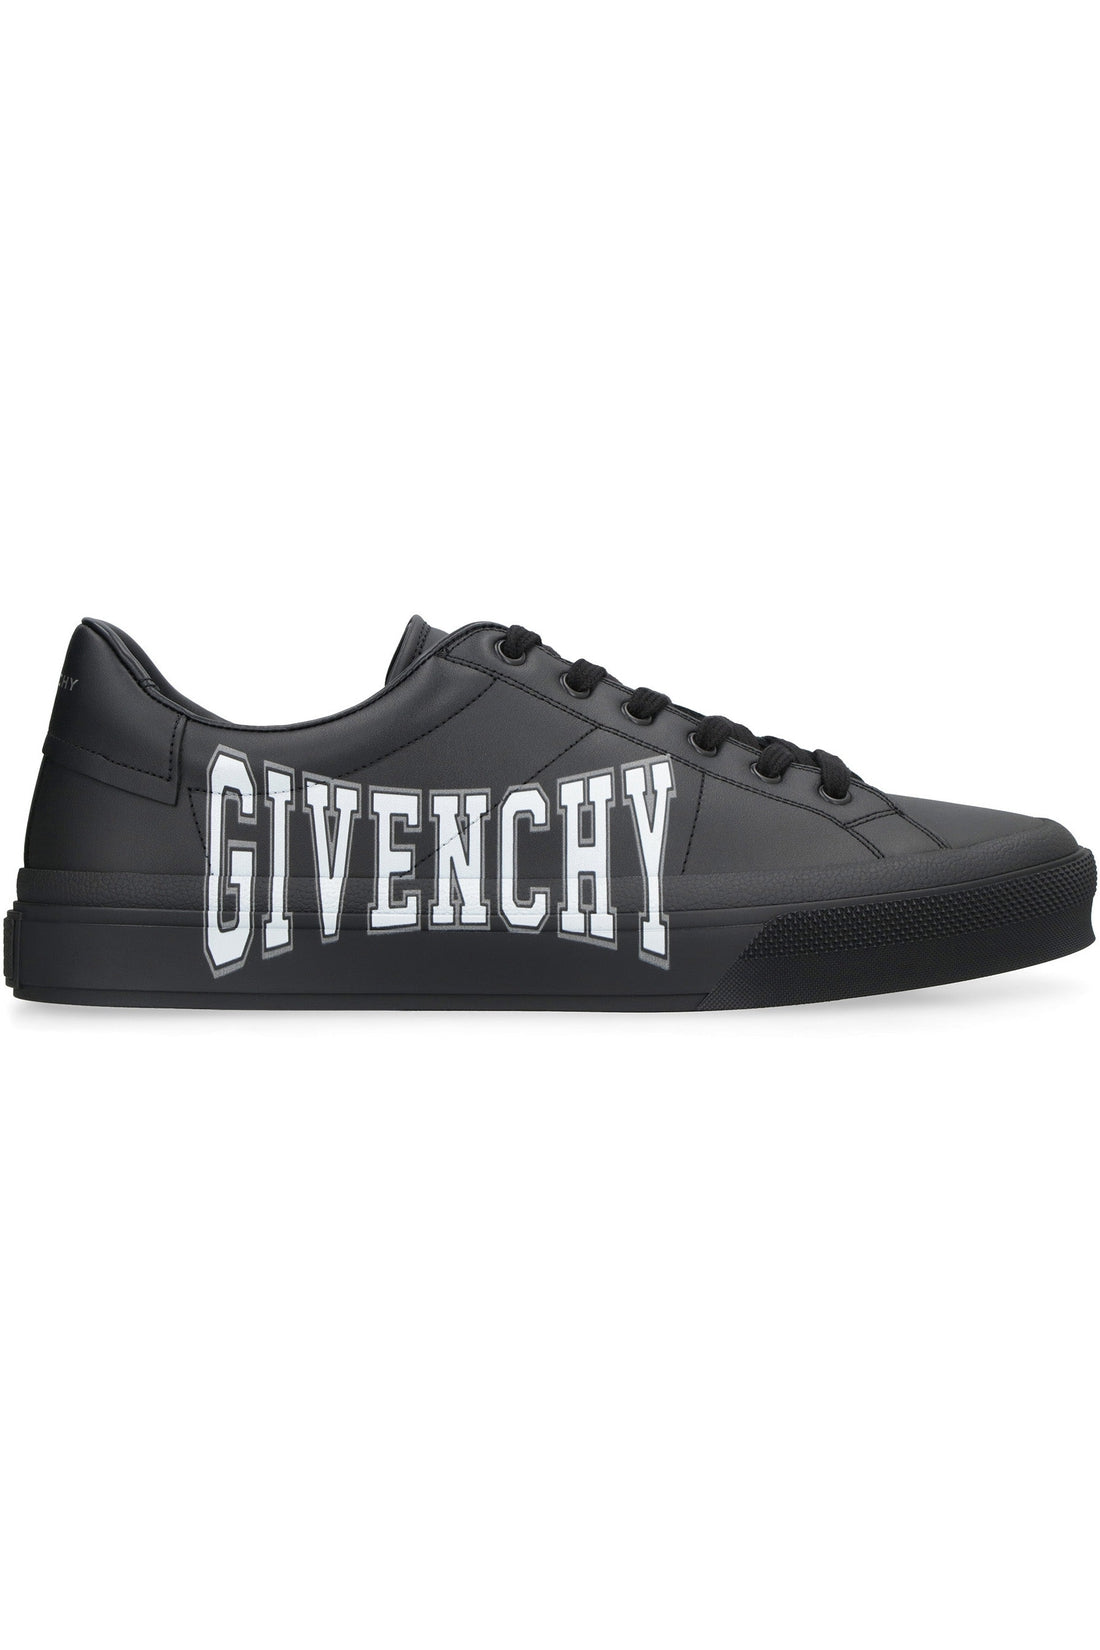 Givenchy-OUTLET-SALE-City Sport low-top sneakers-ARCHIVIST